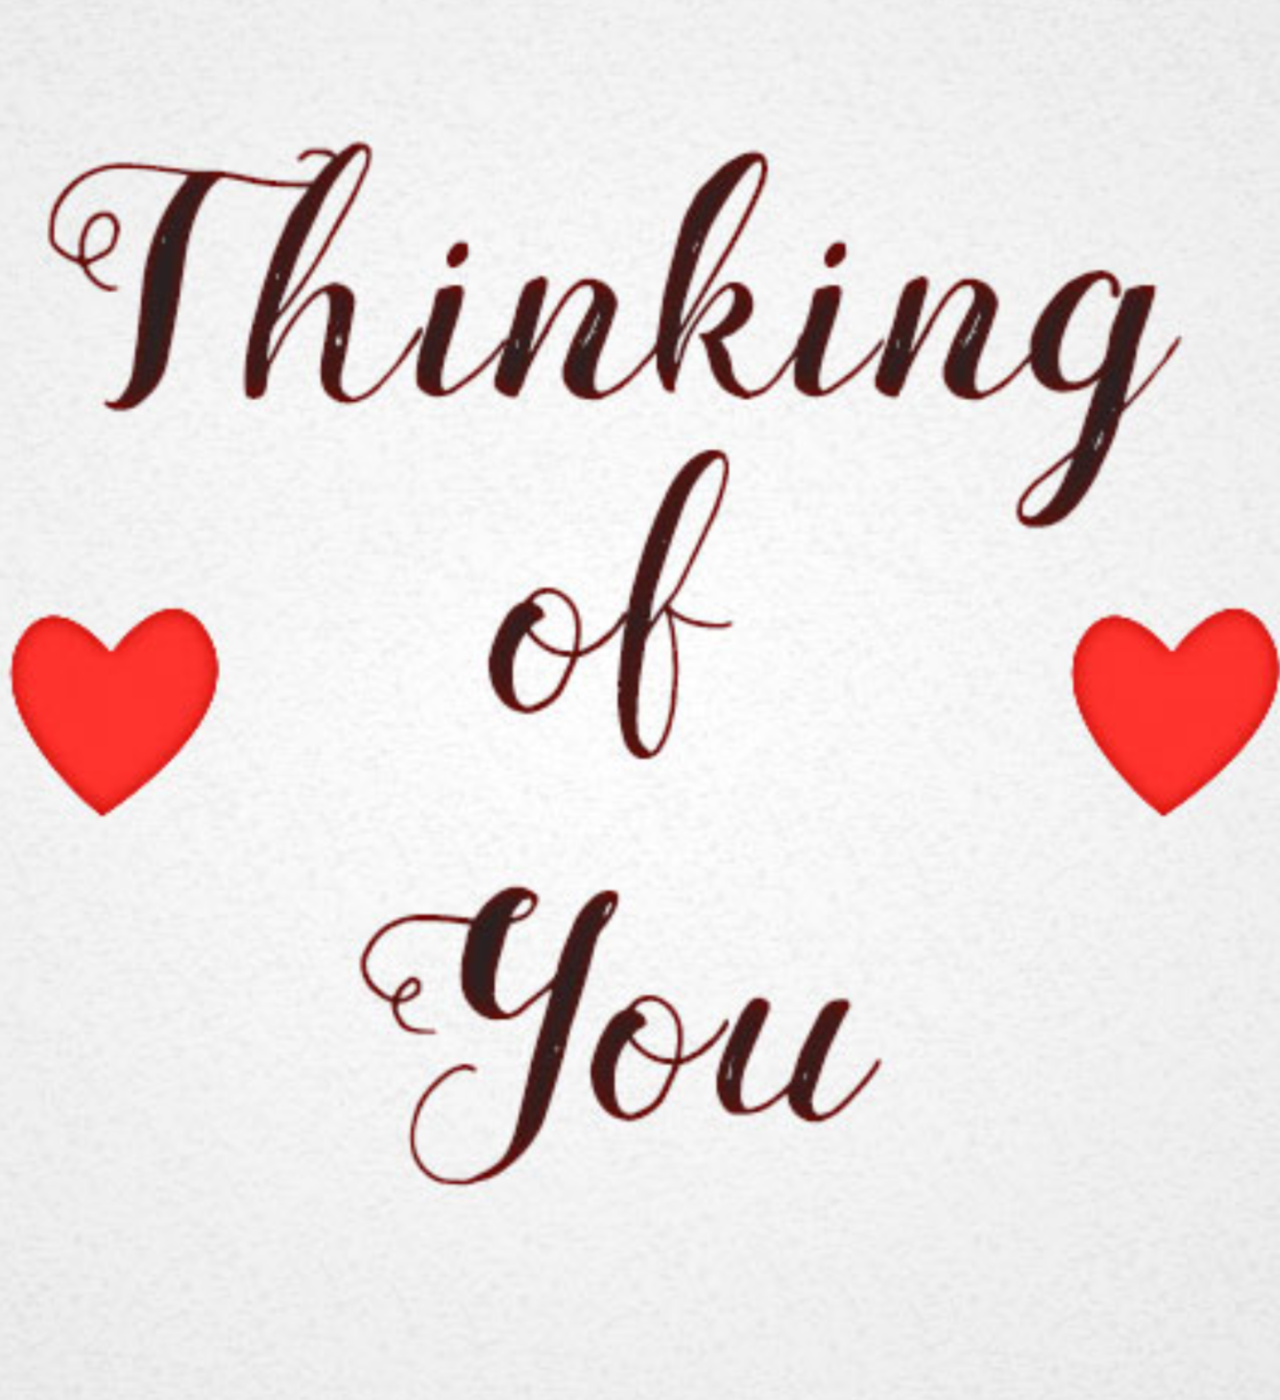 It my if you. Thinking of you. Thinking about you картинки. I think of you открытка. I think about you картинки.